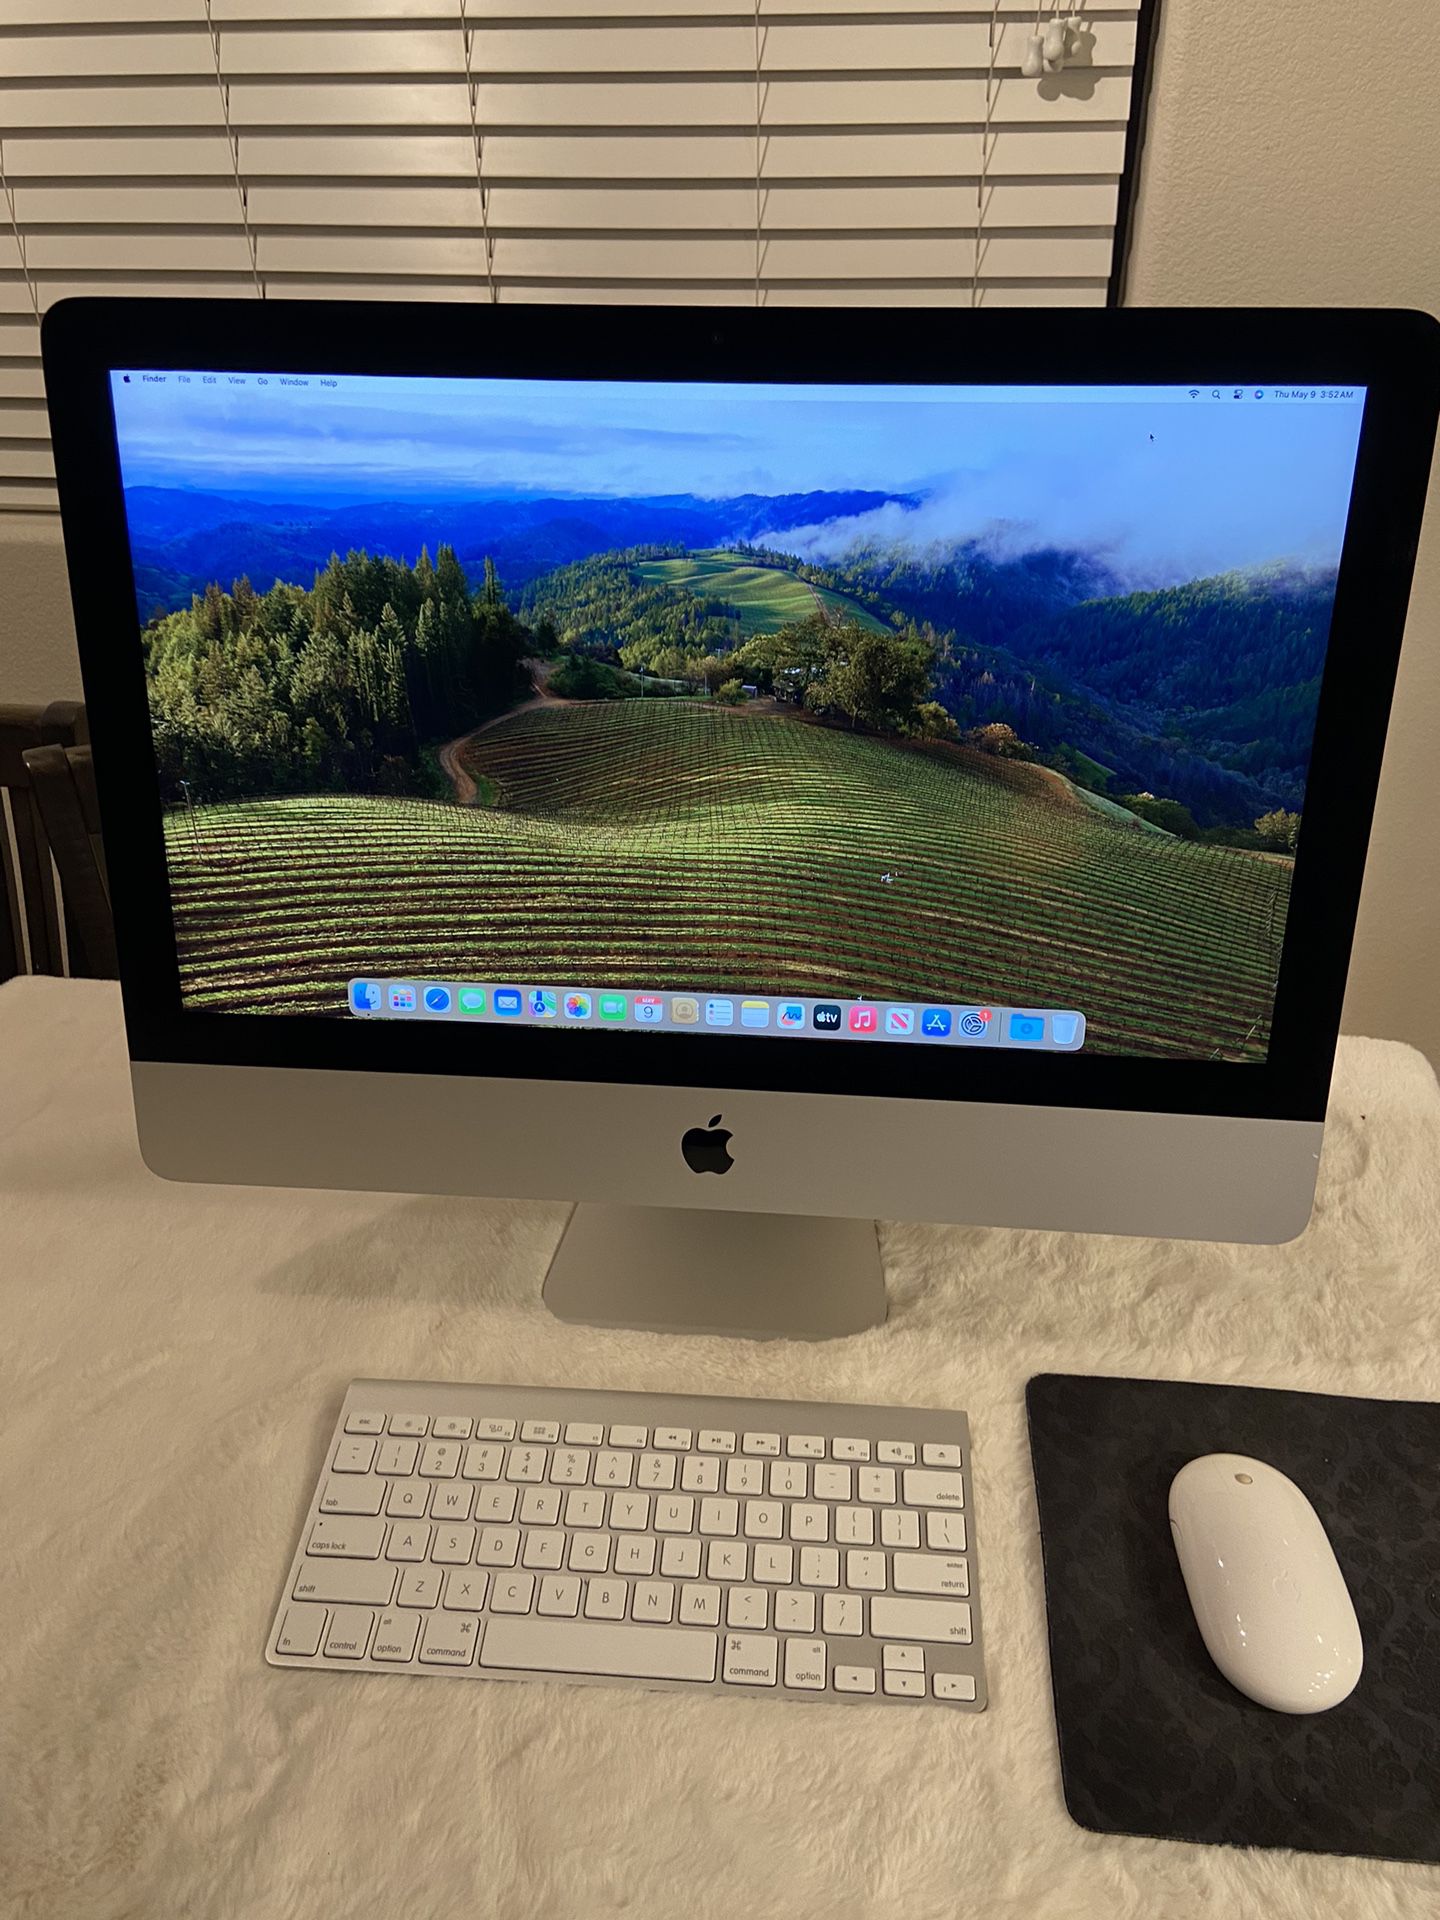 2019 Apple iMac 21.5-inch 4K Retina Display 3.2 GHz 6-core i7 Processor 32gb Ram 1tb Hdd. Sonoma macOS . Wireless Keyboard And Mouse 